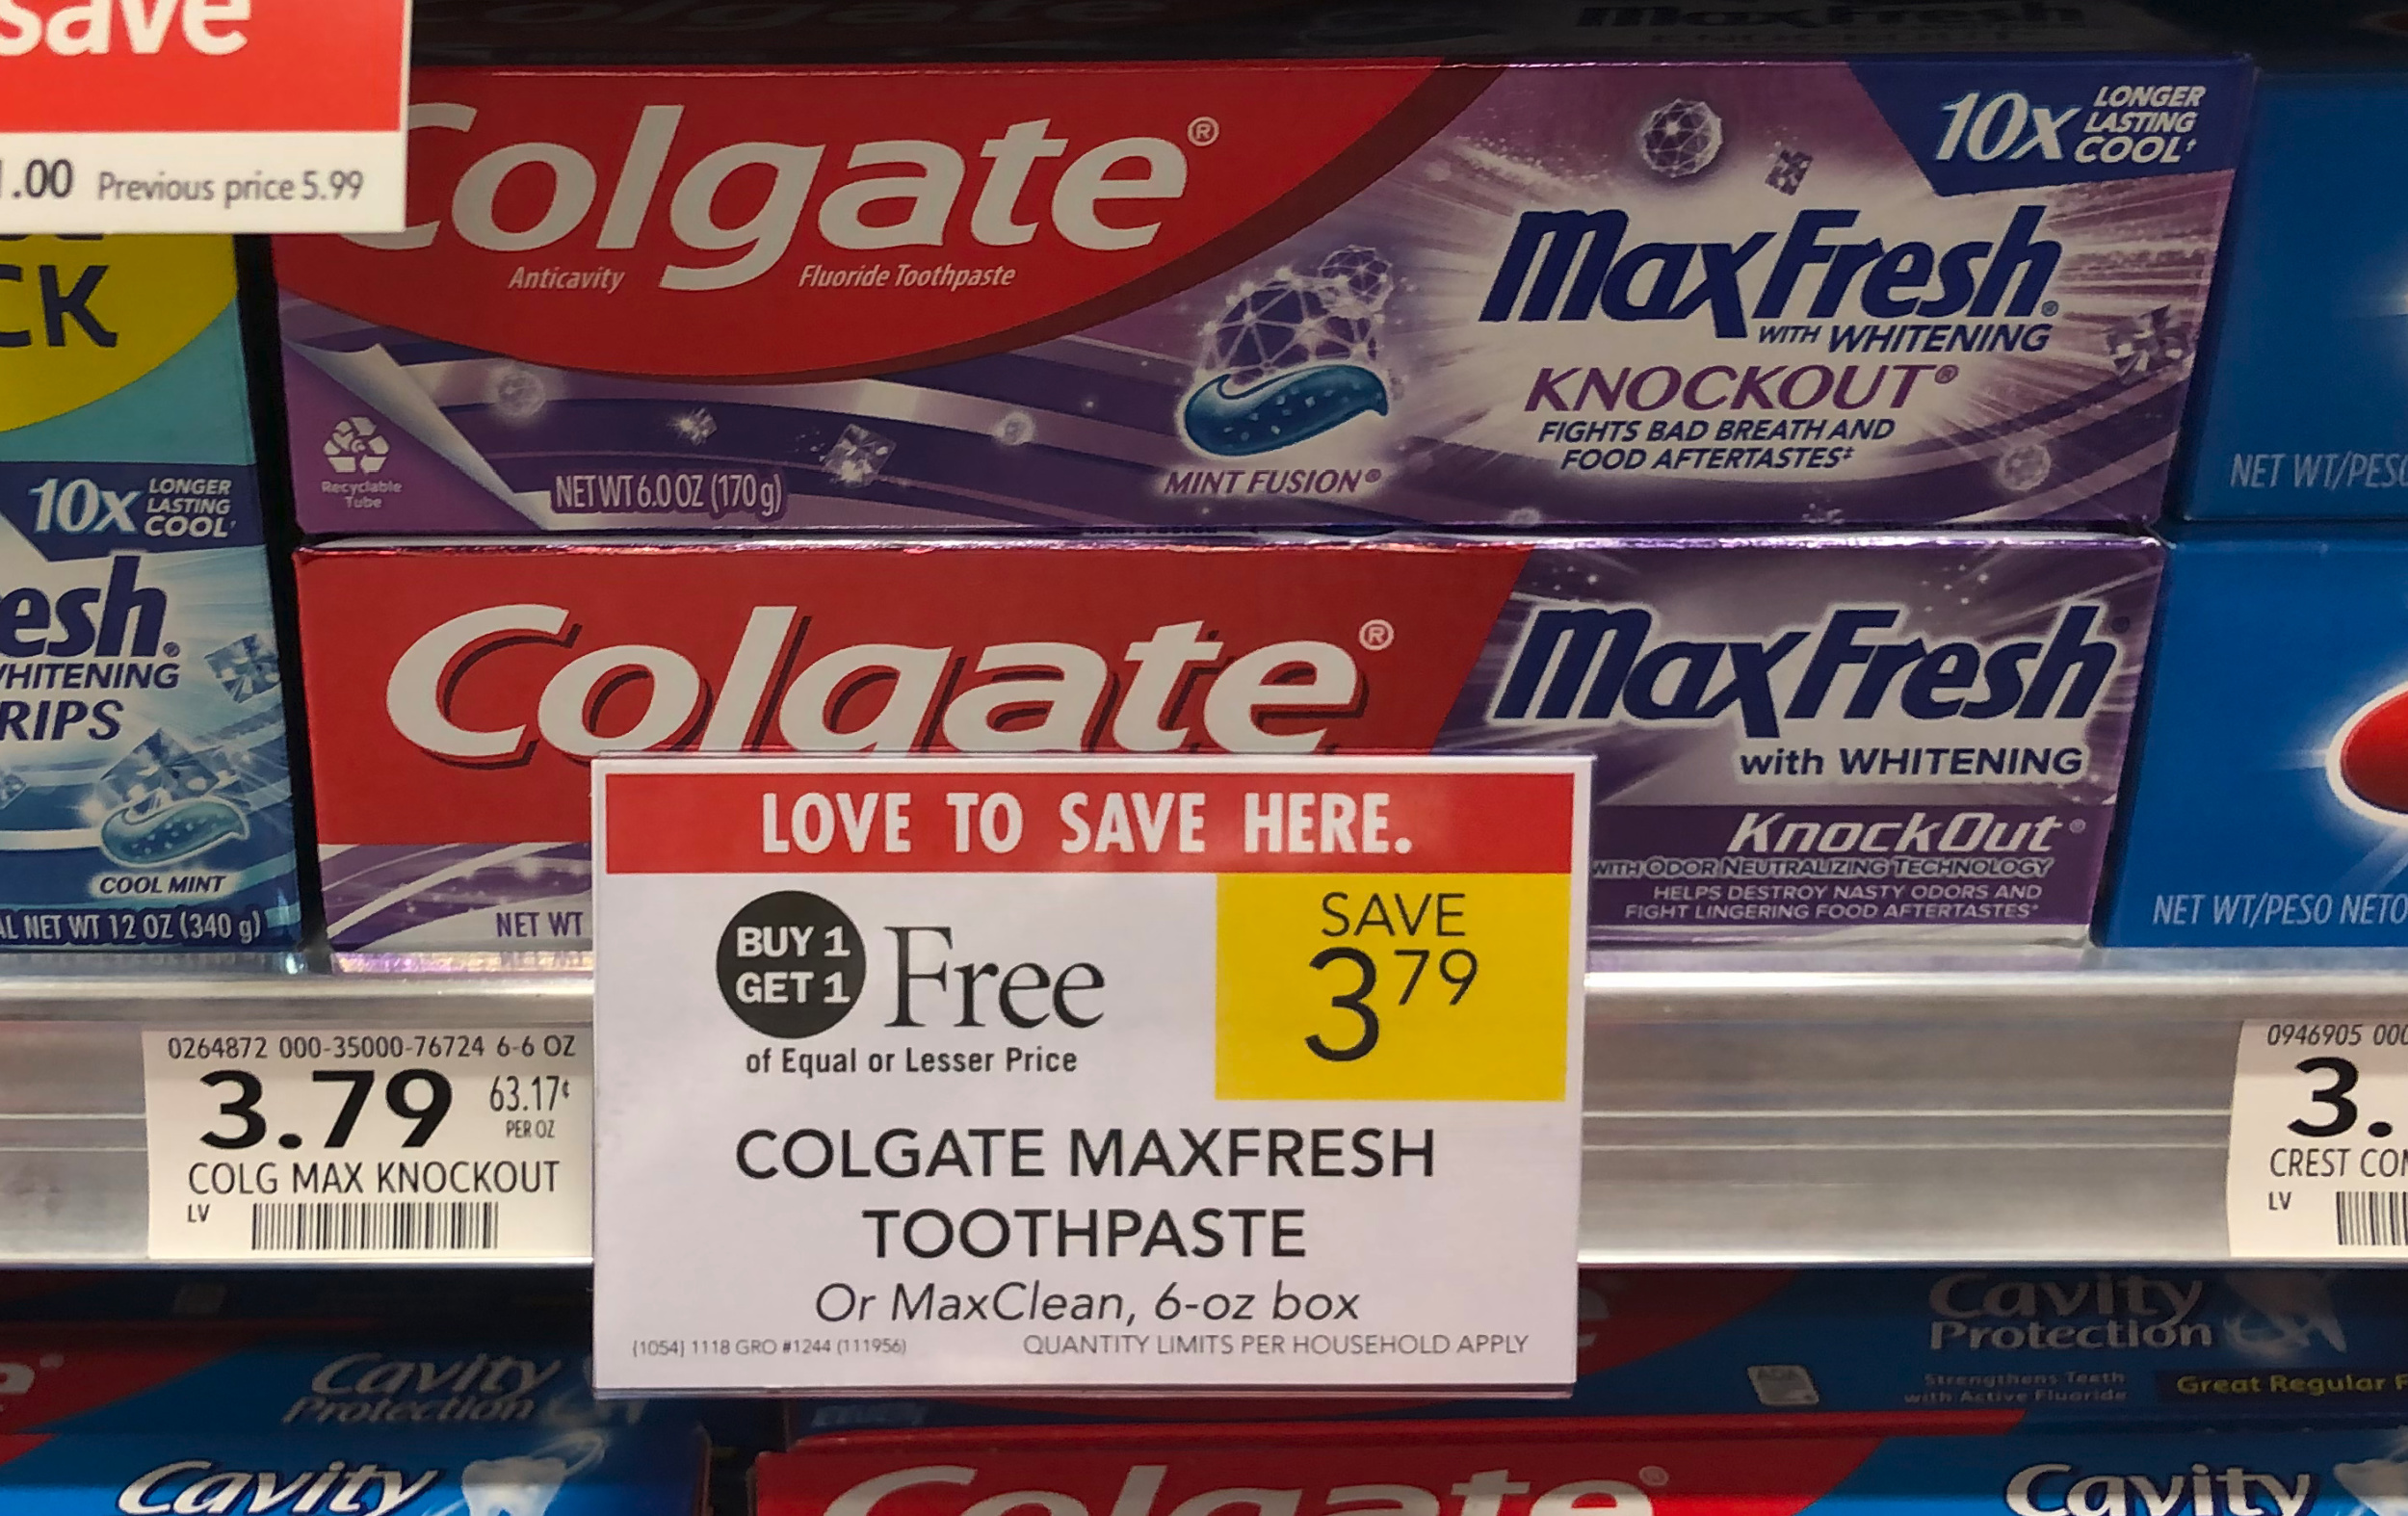 Colgate MaxFresh Toothpaste As Low As FREE At Publix on I Heart Publix